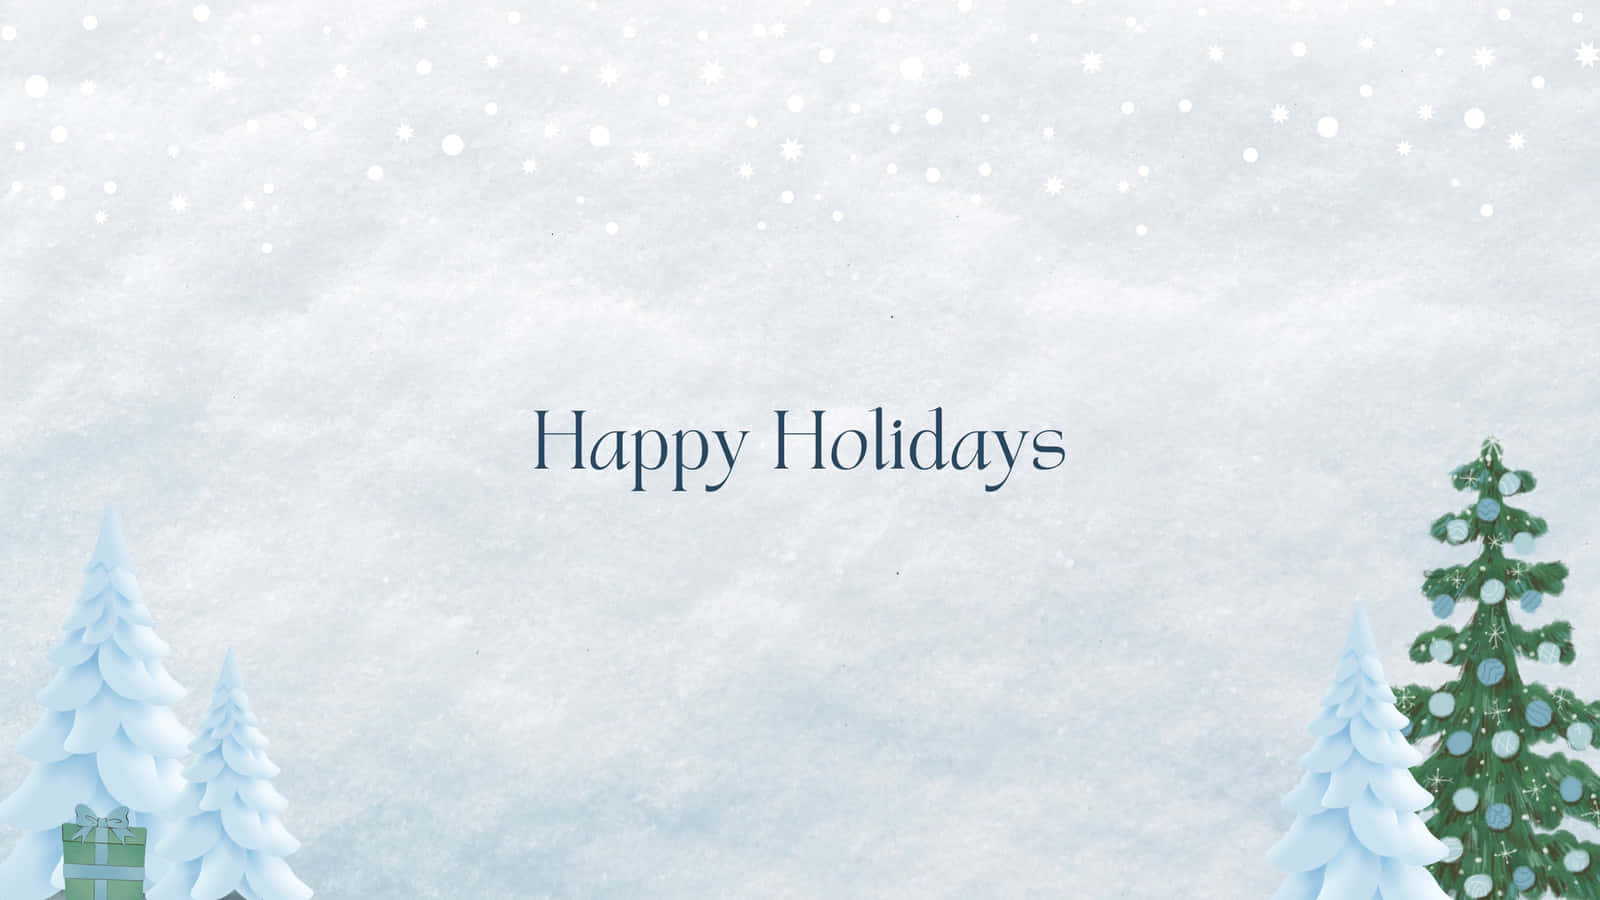 Happy Holidays Background With Snowy Trees Wallpaper